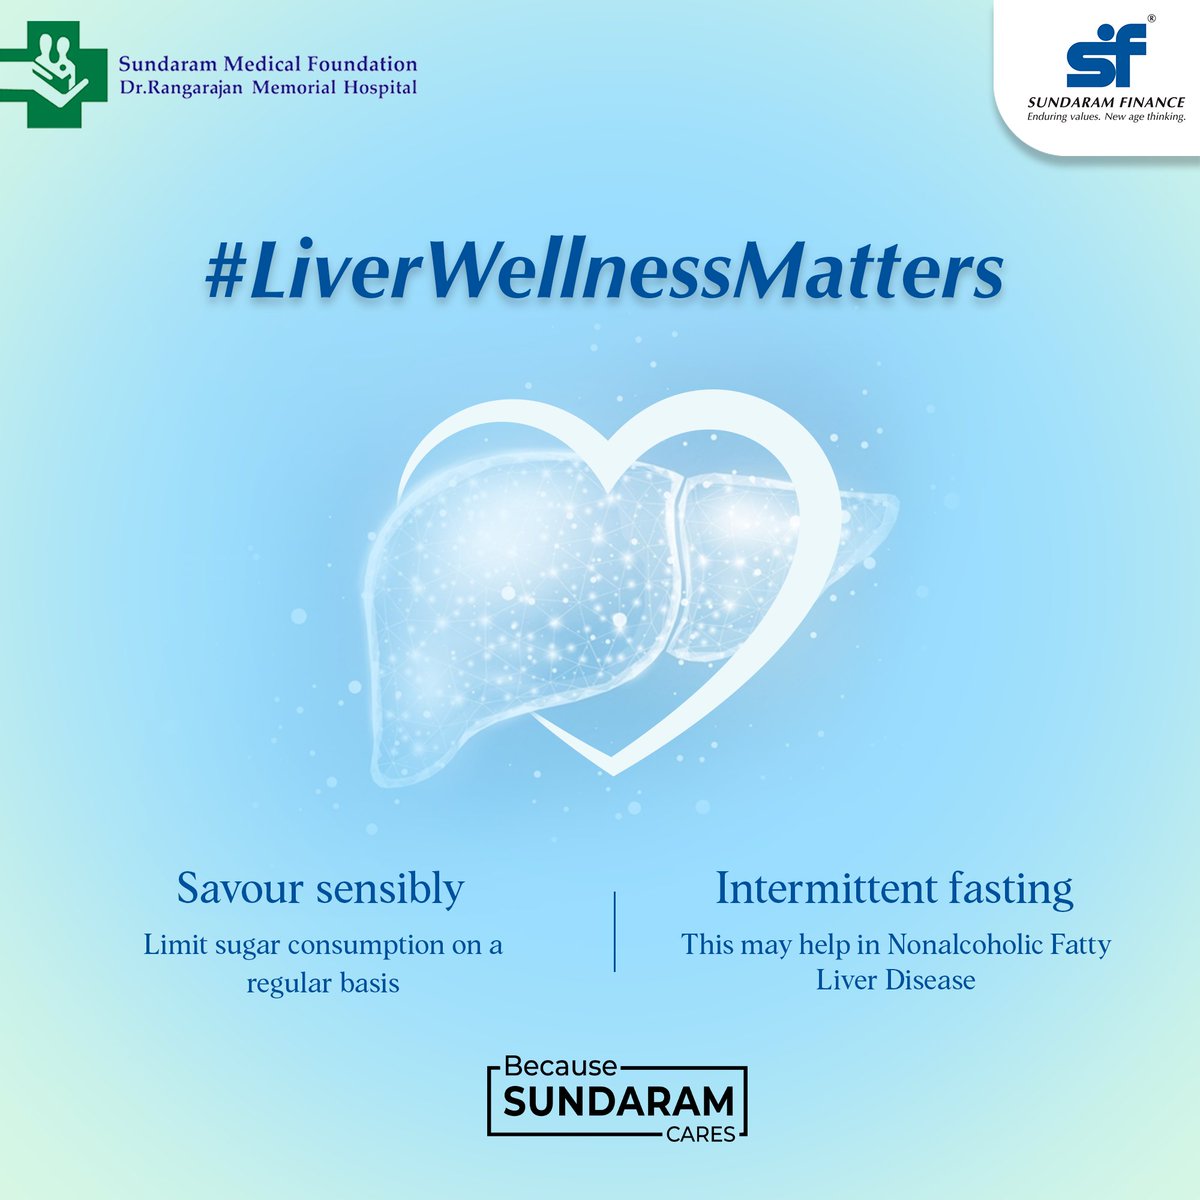 A healthy liver is vital for overall well-being. Protect it with healthy habits and mindful choices. Stay active for a healthier liver and overall wellness.

#liverhealth #healthyliver #liverhealthmatters